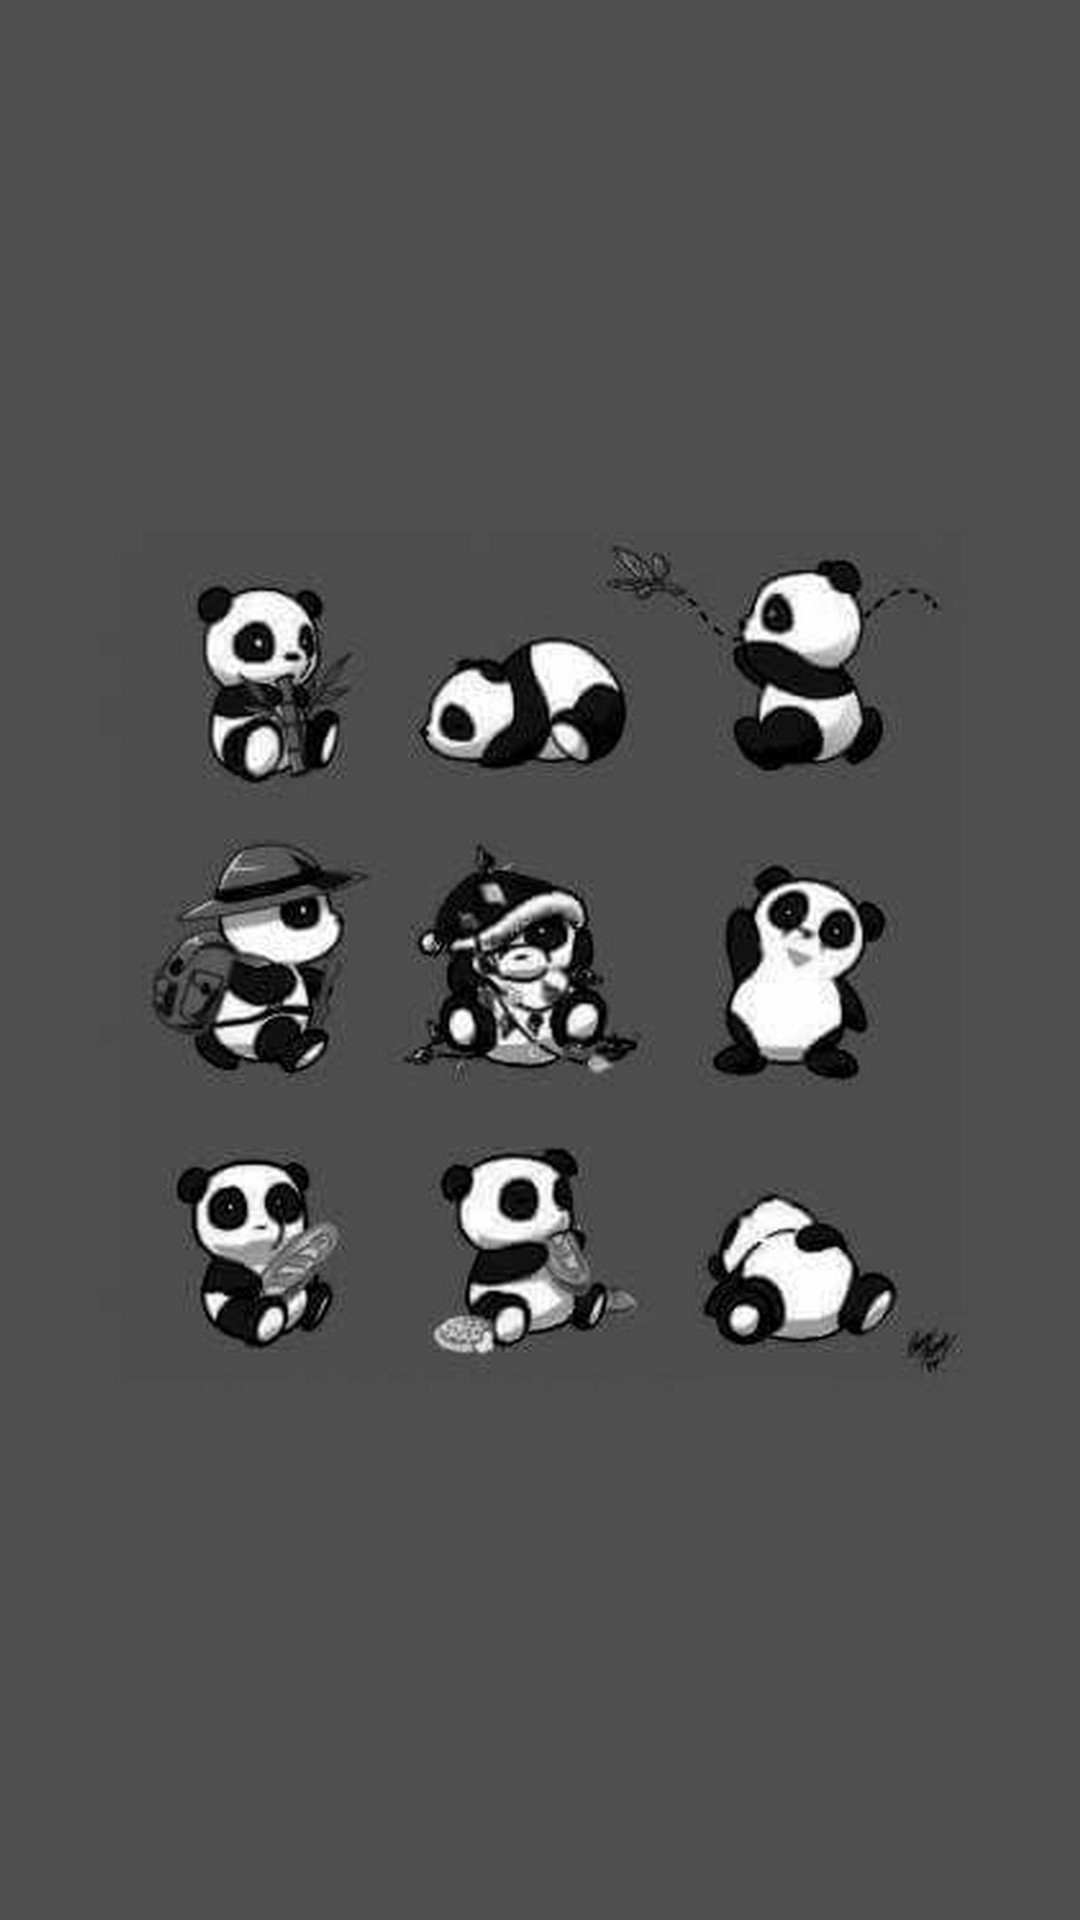 Baby Panda HD Wallpapers For Mobile 1080x1920